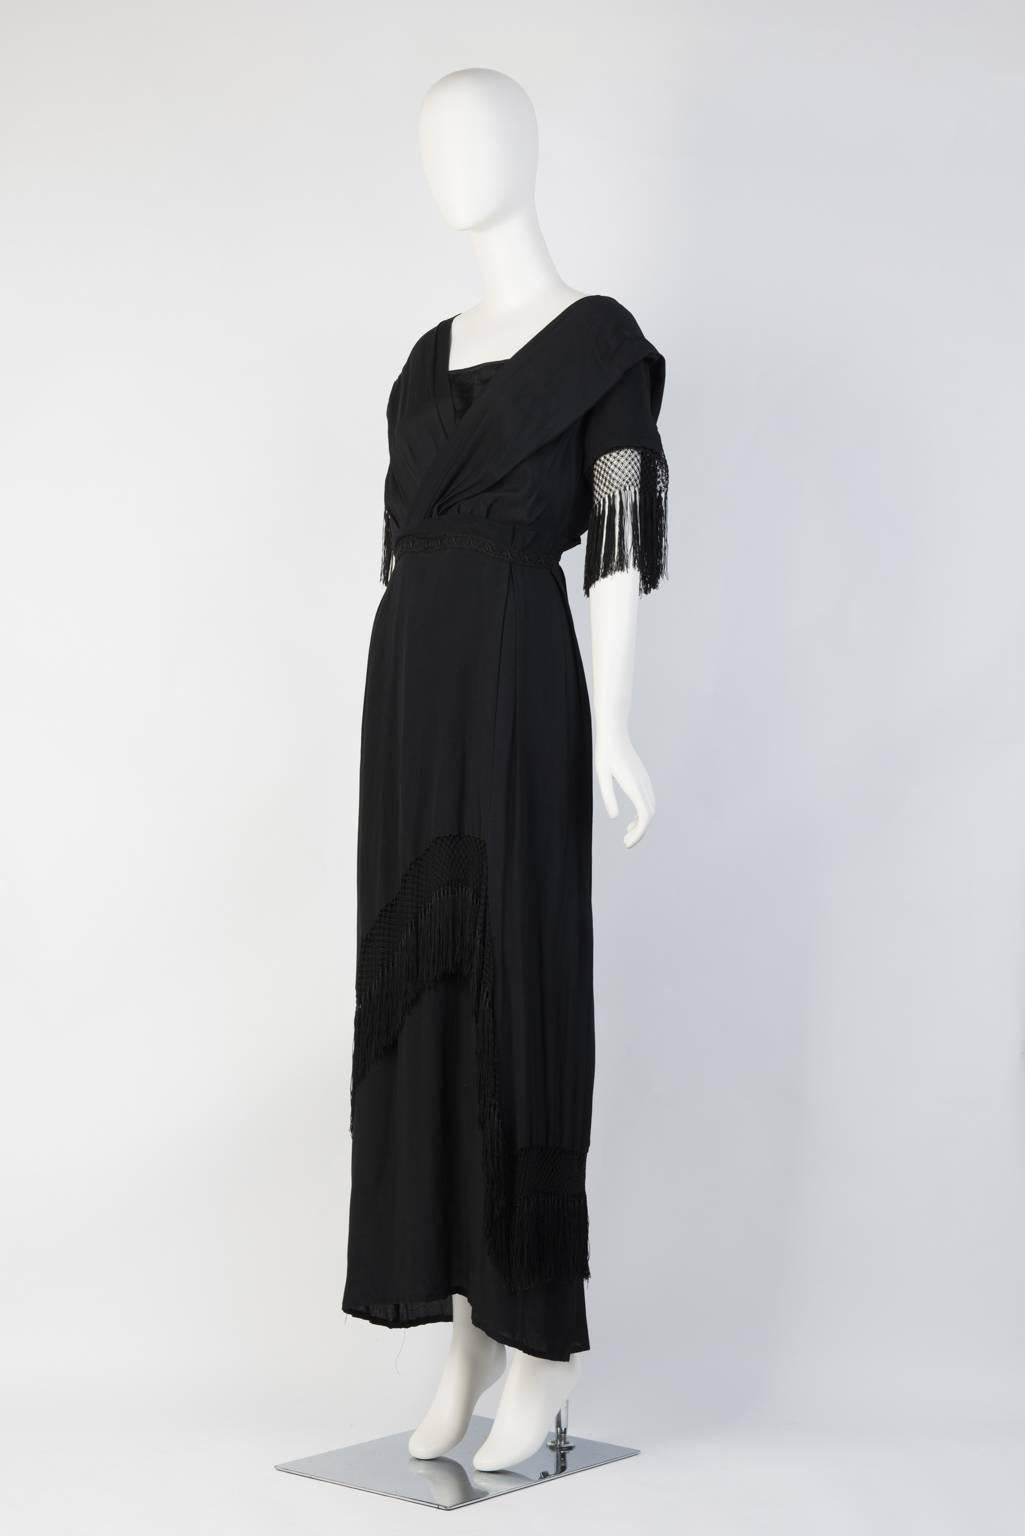 30s tassel dress in crepe chiffon with wrapped exquisite tassel details. Empire waist with lace panel. Normal signs of wear. Few minor torns around the dress.